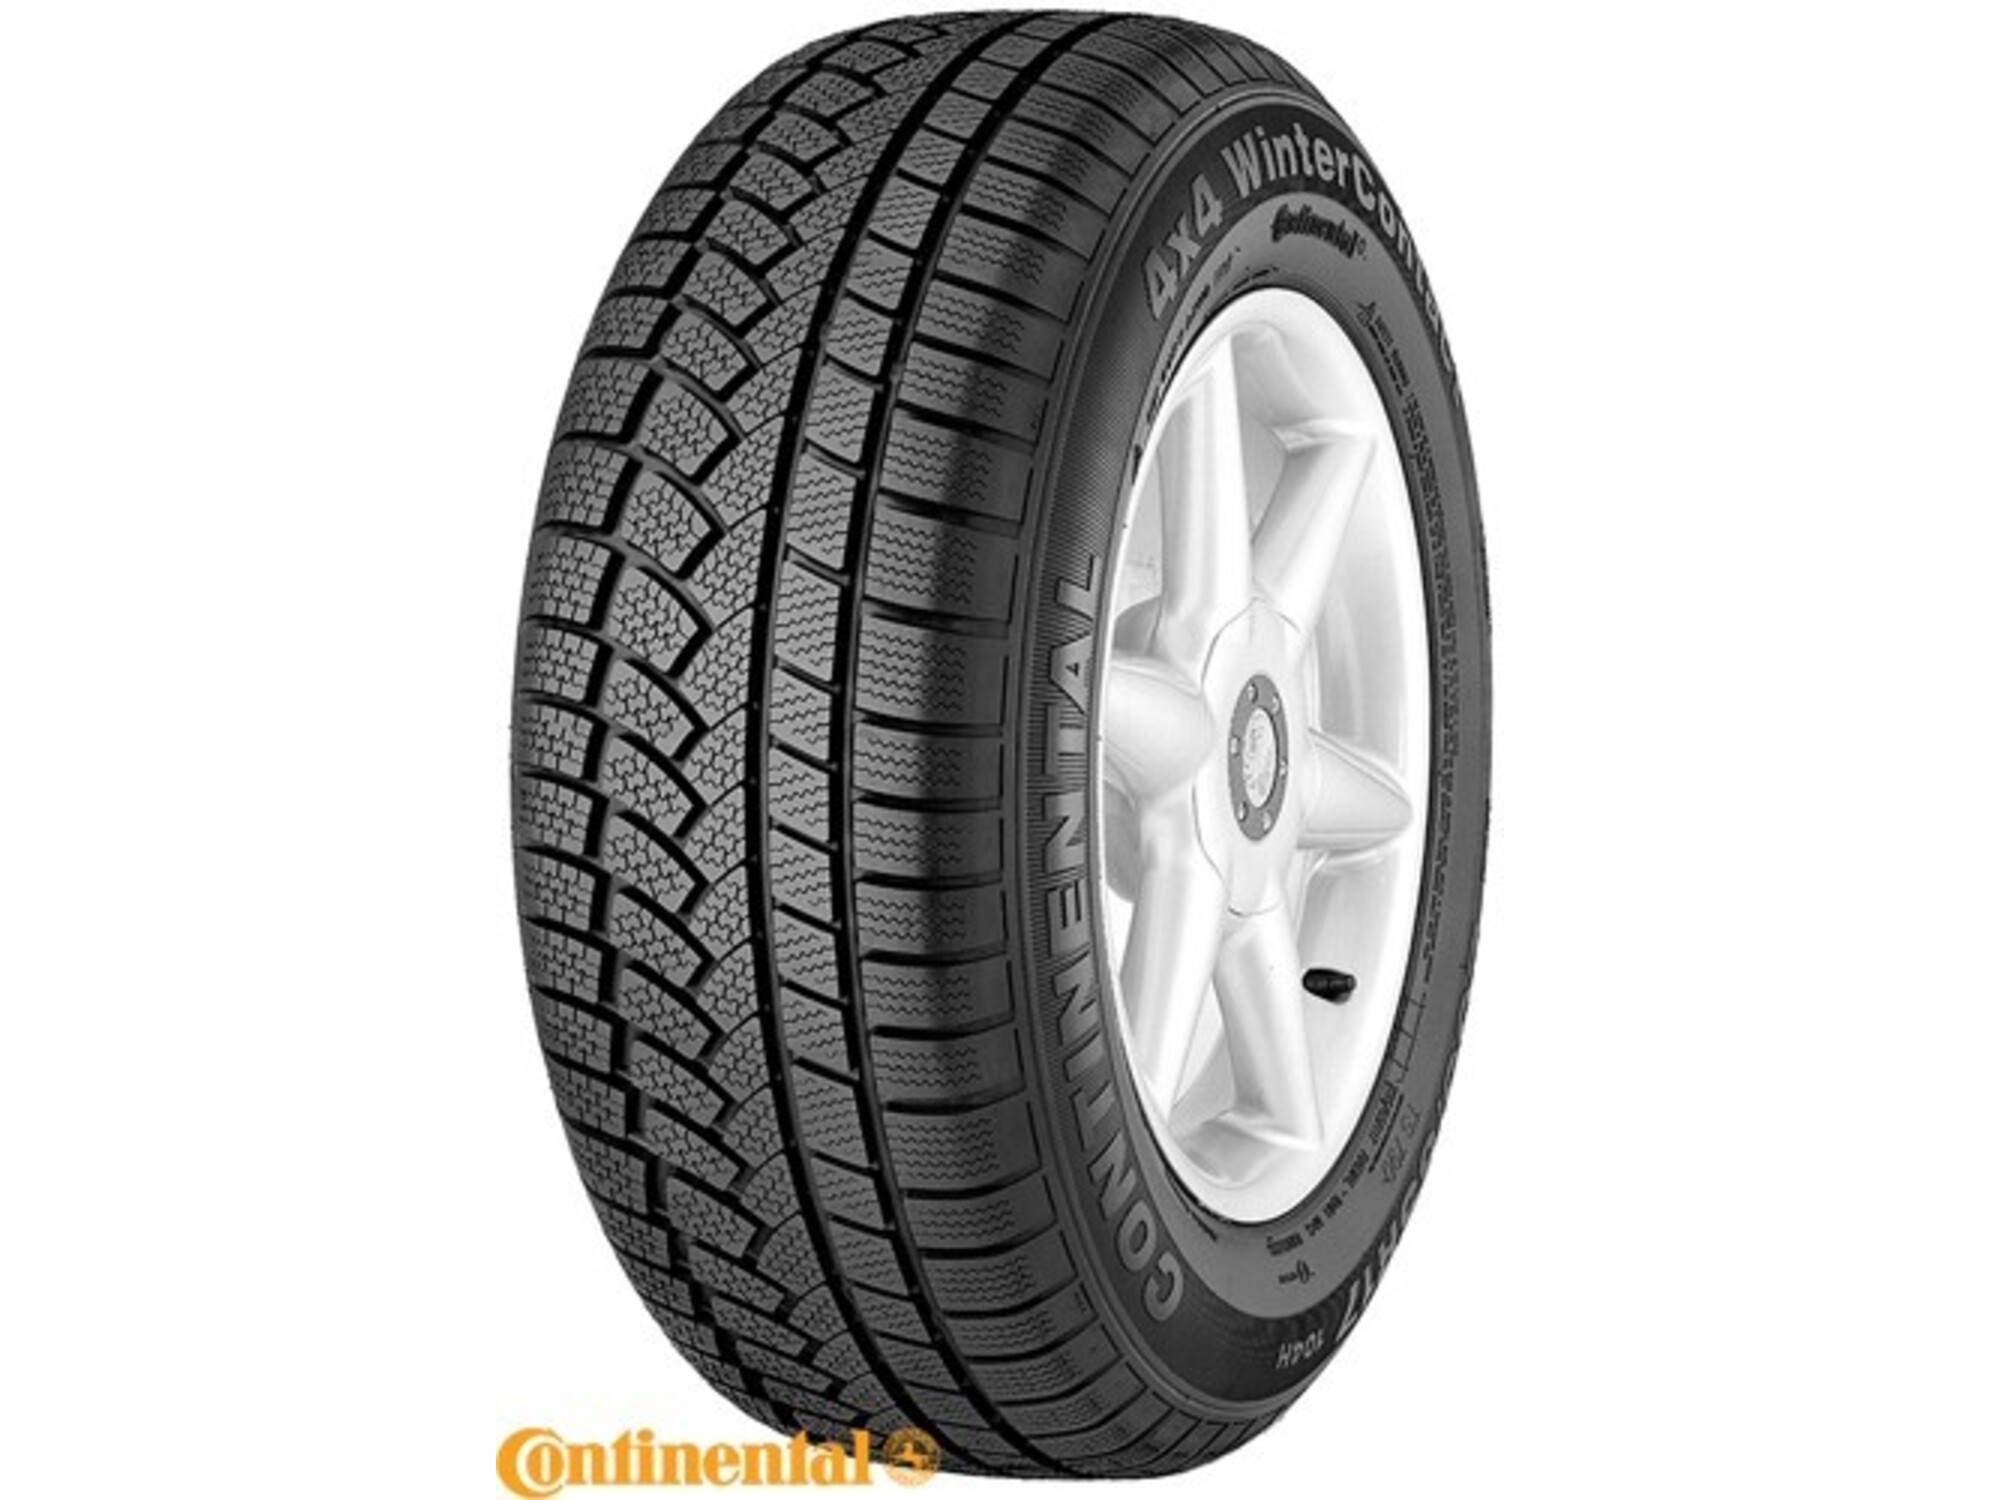 CONTINENTAL zimske gume 255/55R18 105H FR 3PMSF * 4x4WinterContact m+s Continental